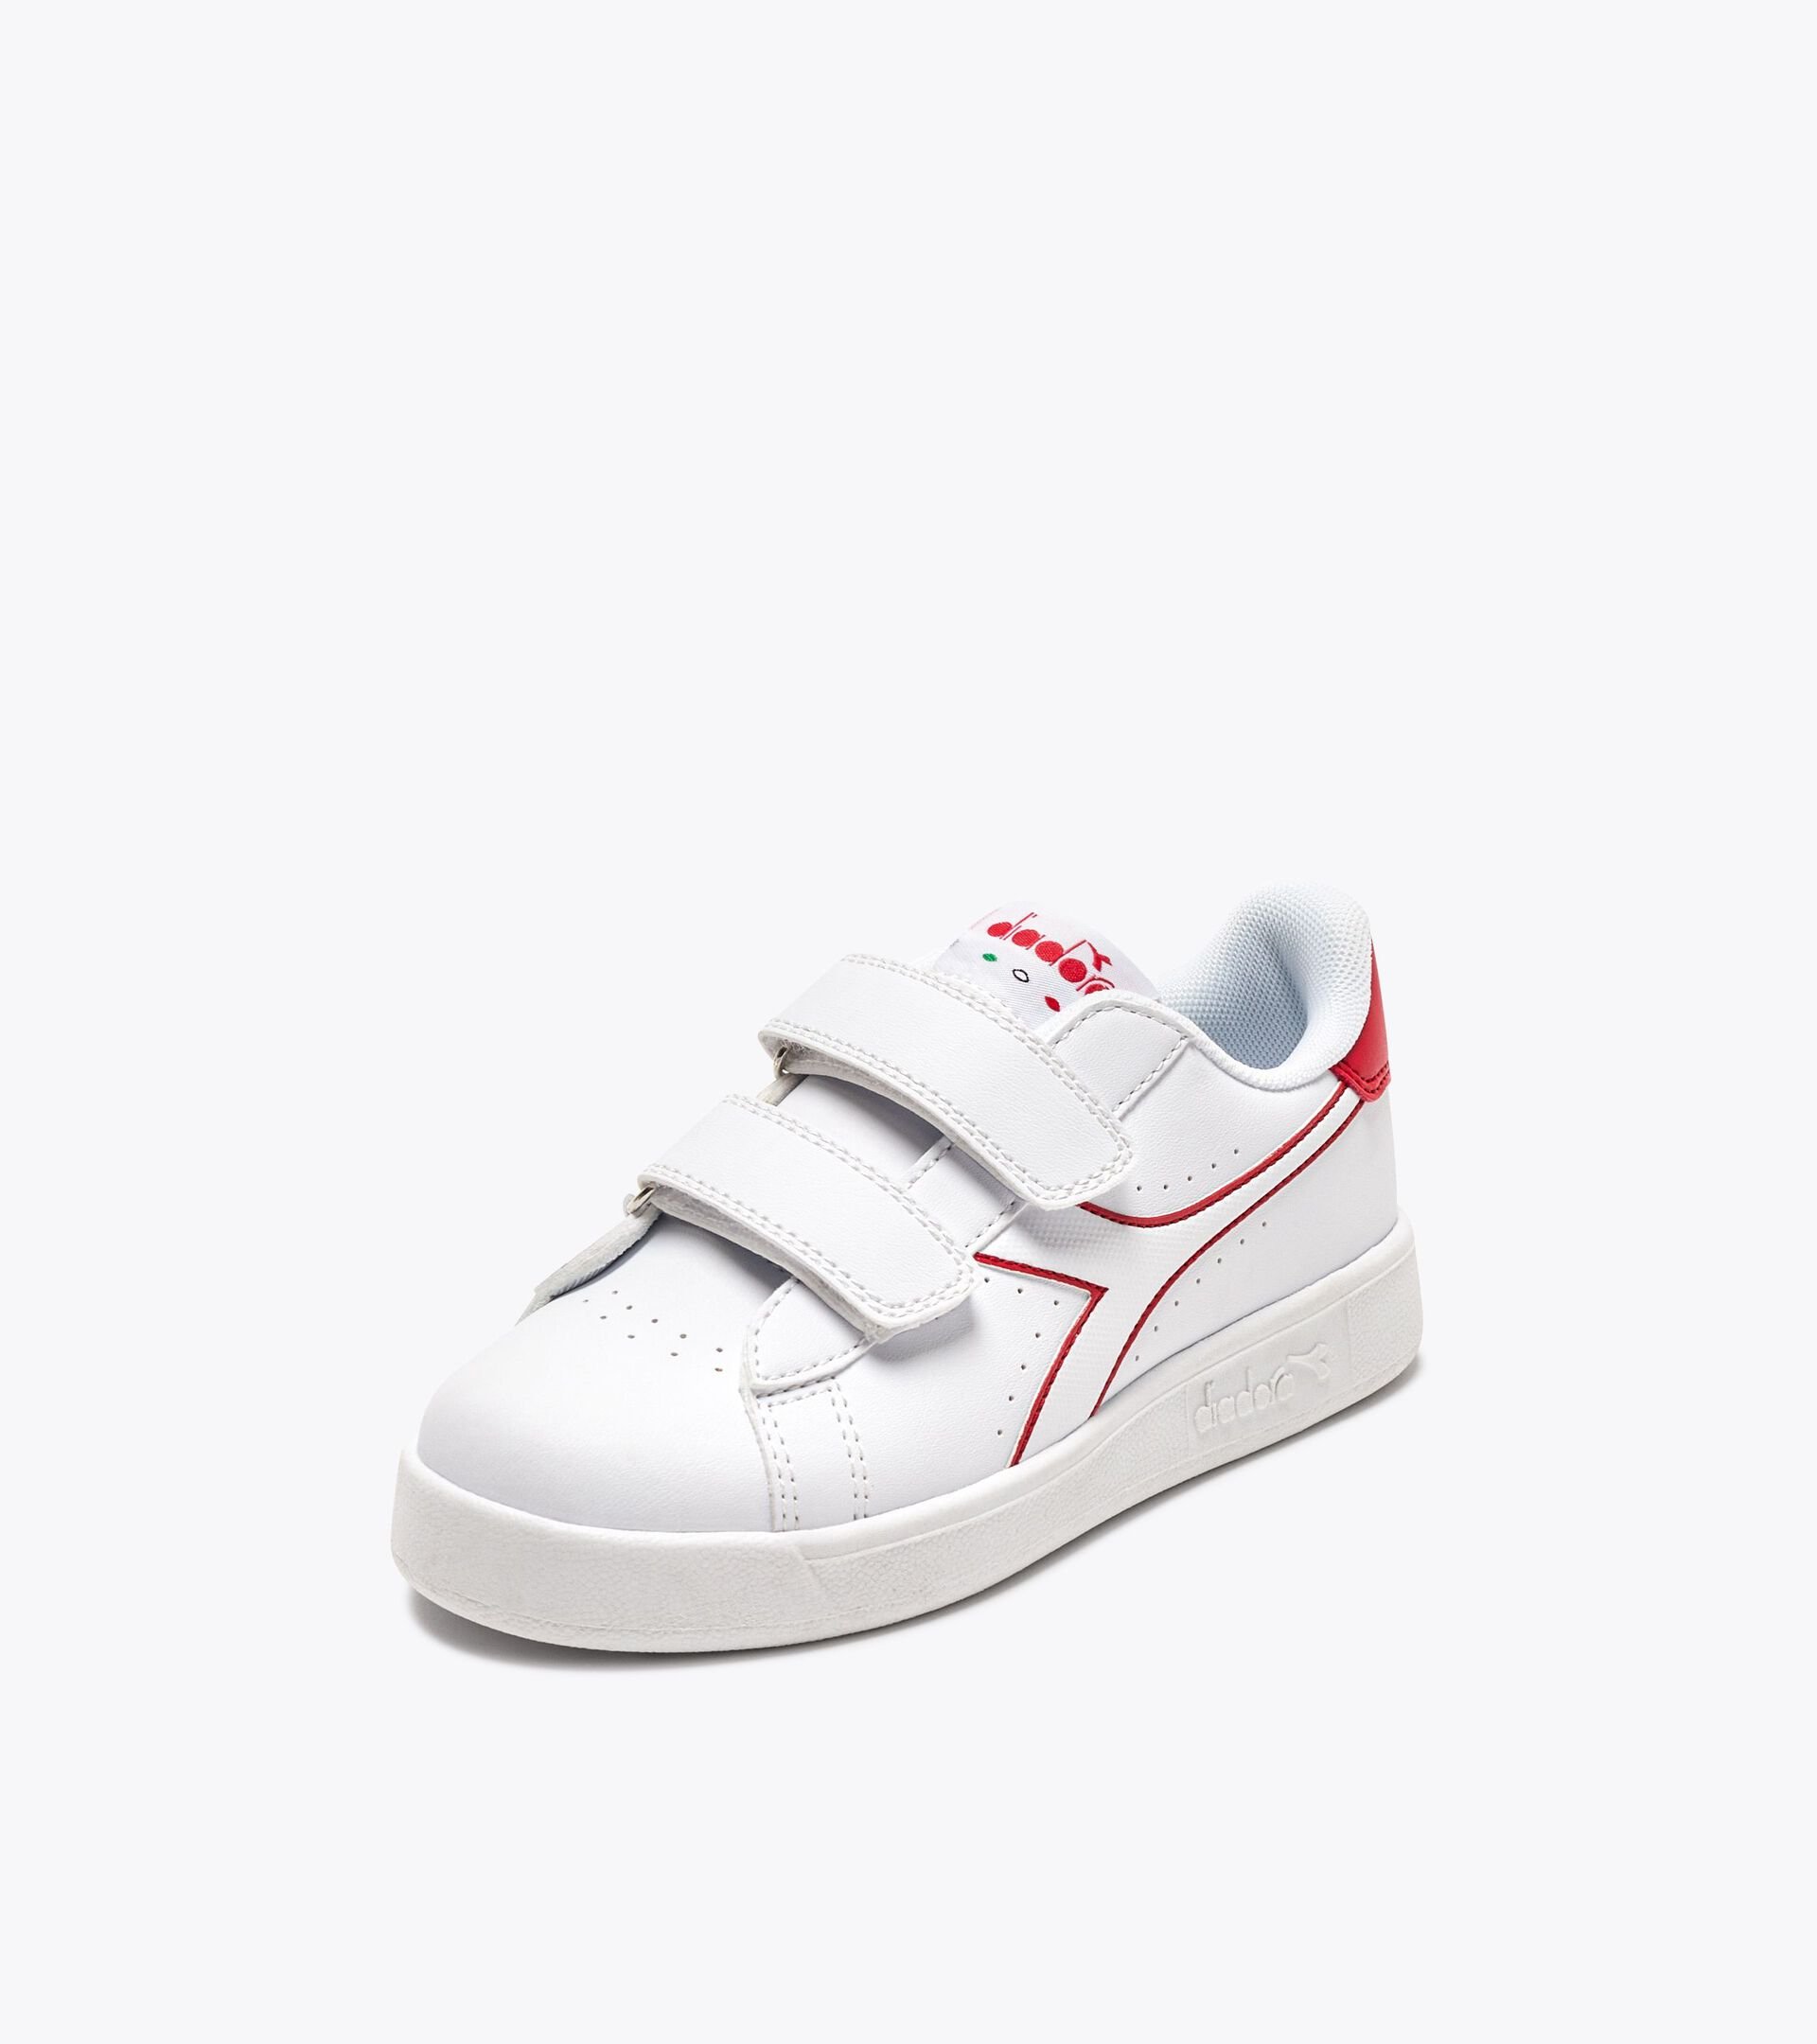 Sports shoes - Kids 4-8 years GAME P PS WHITE/BITTERSWEET RED - Diadora